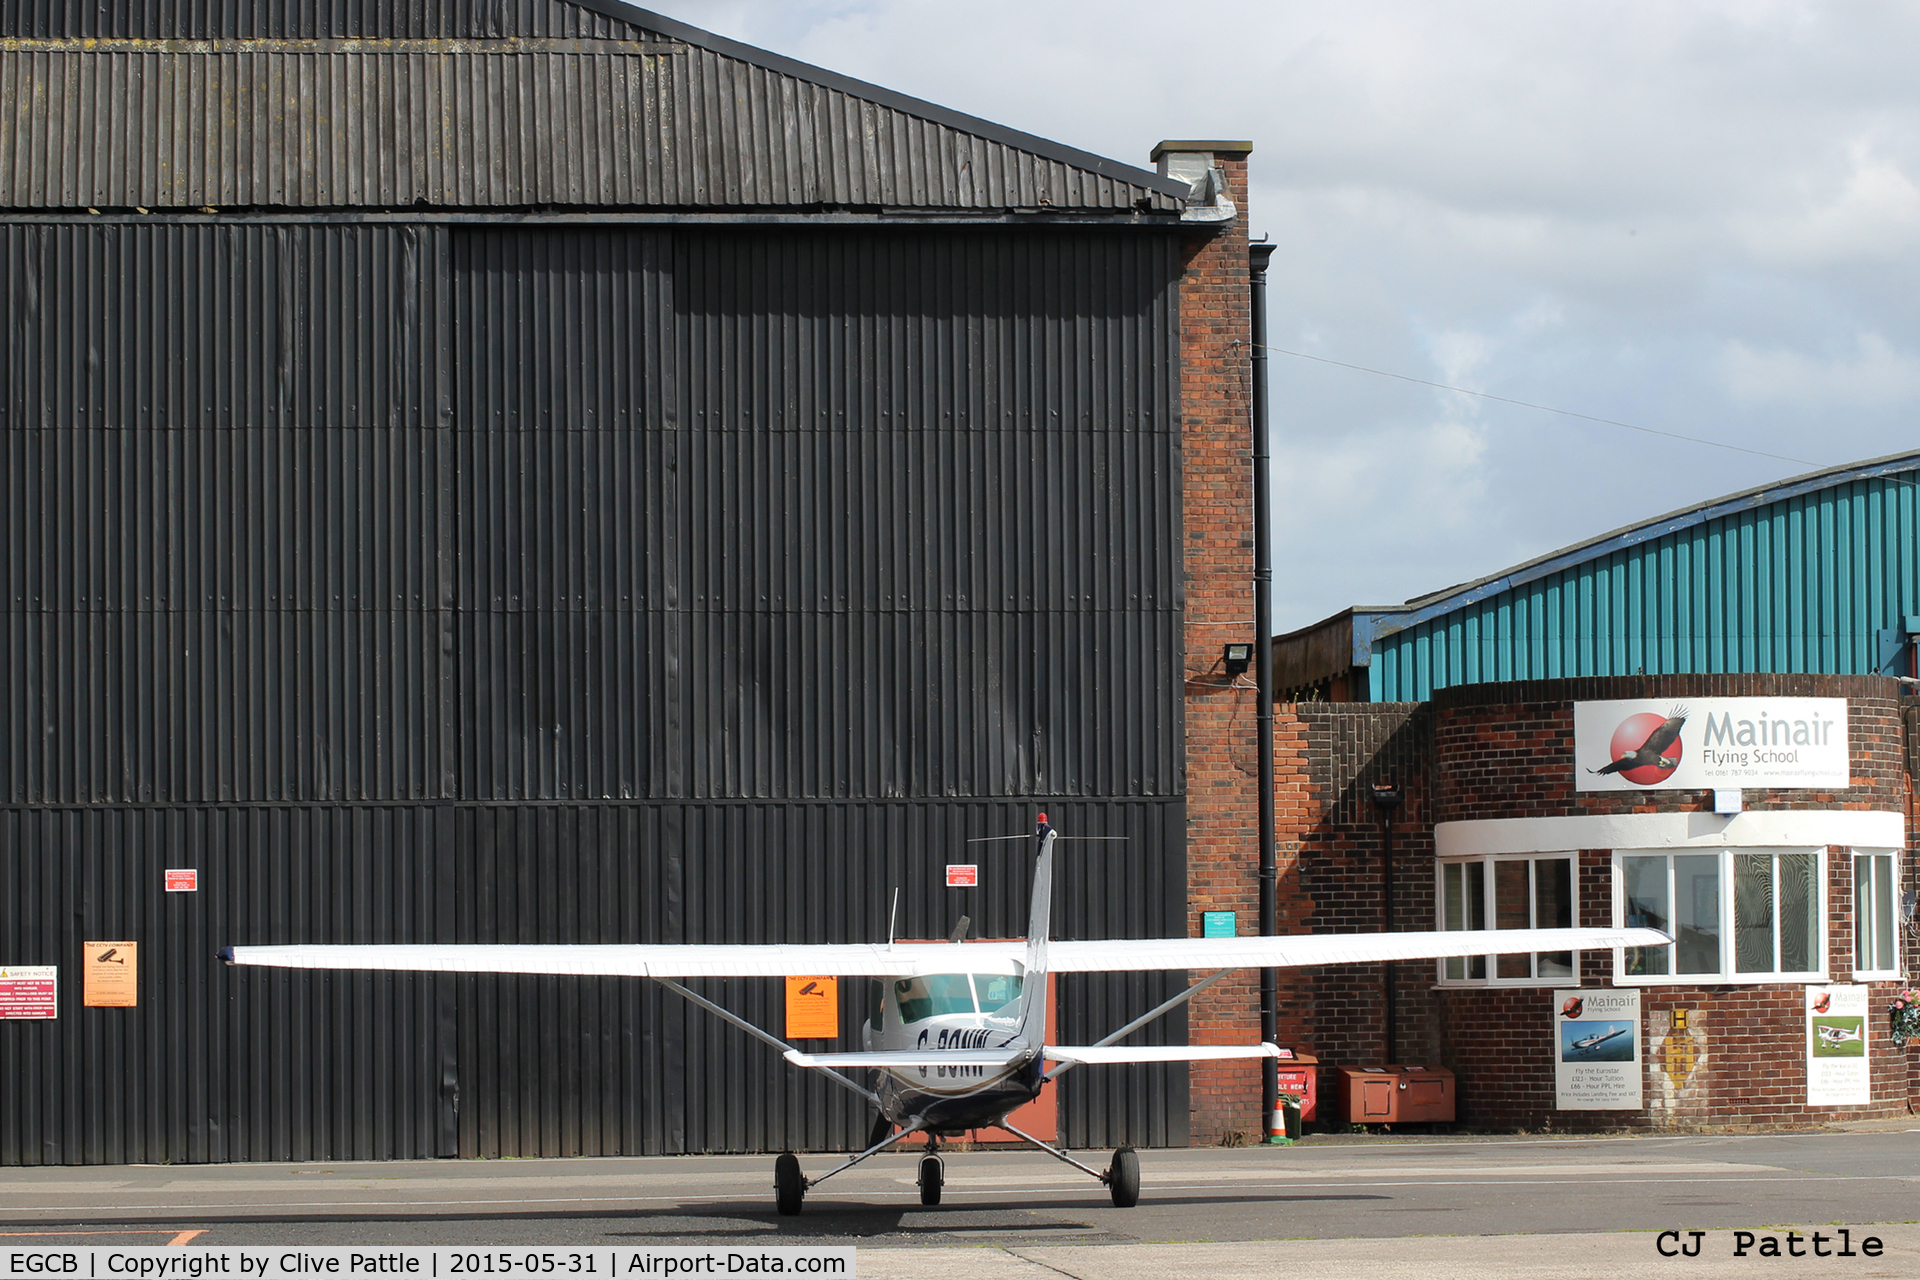 City Airport Manchester, Manchester, England United Kingdom (EGCB) - Hangar and historic buildings at Barton, Manchester City Airport, EGCB